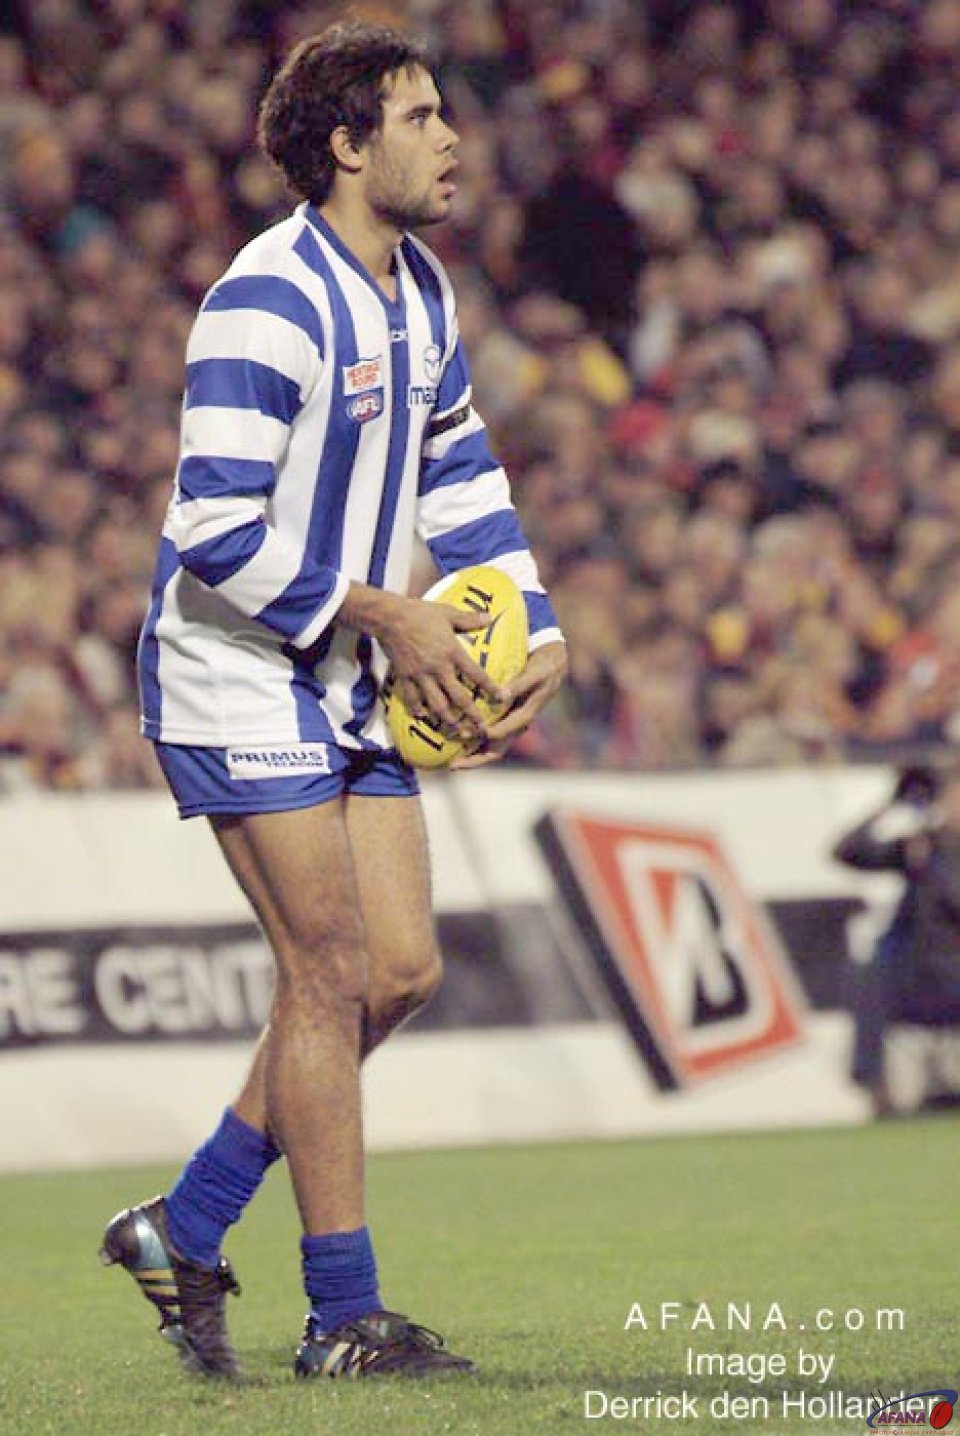 [b]North Melbourne size up their defensive options from a kickout[/b]